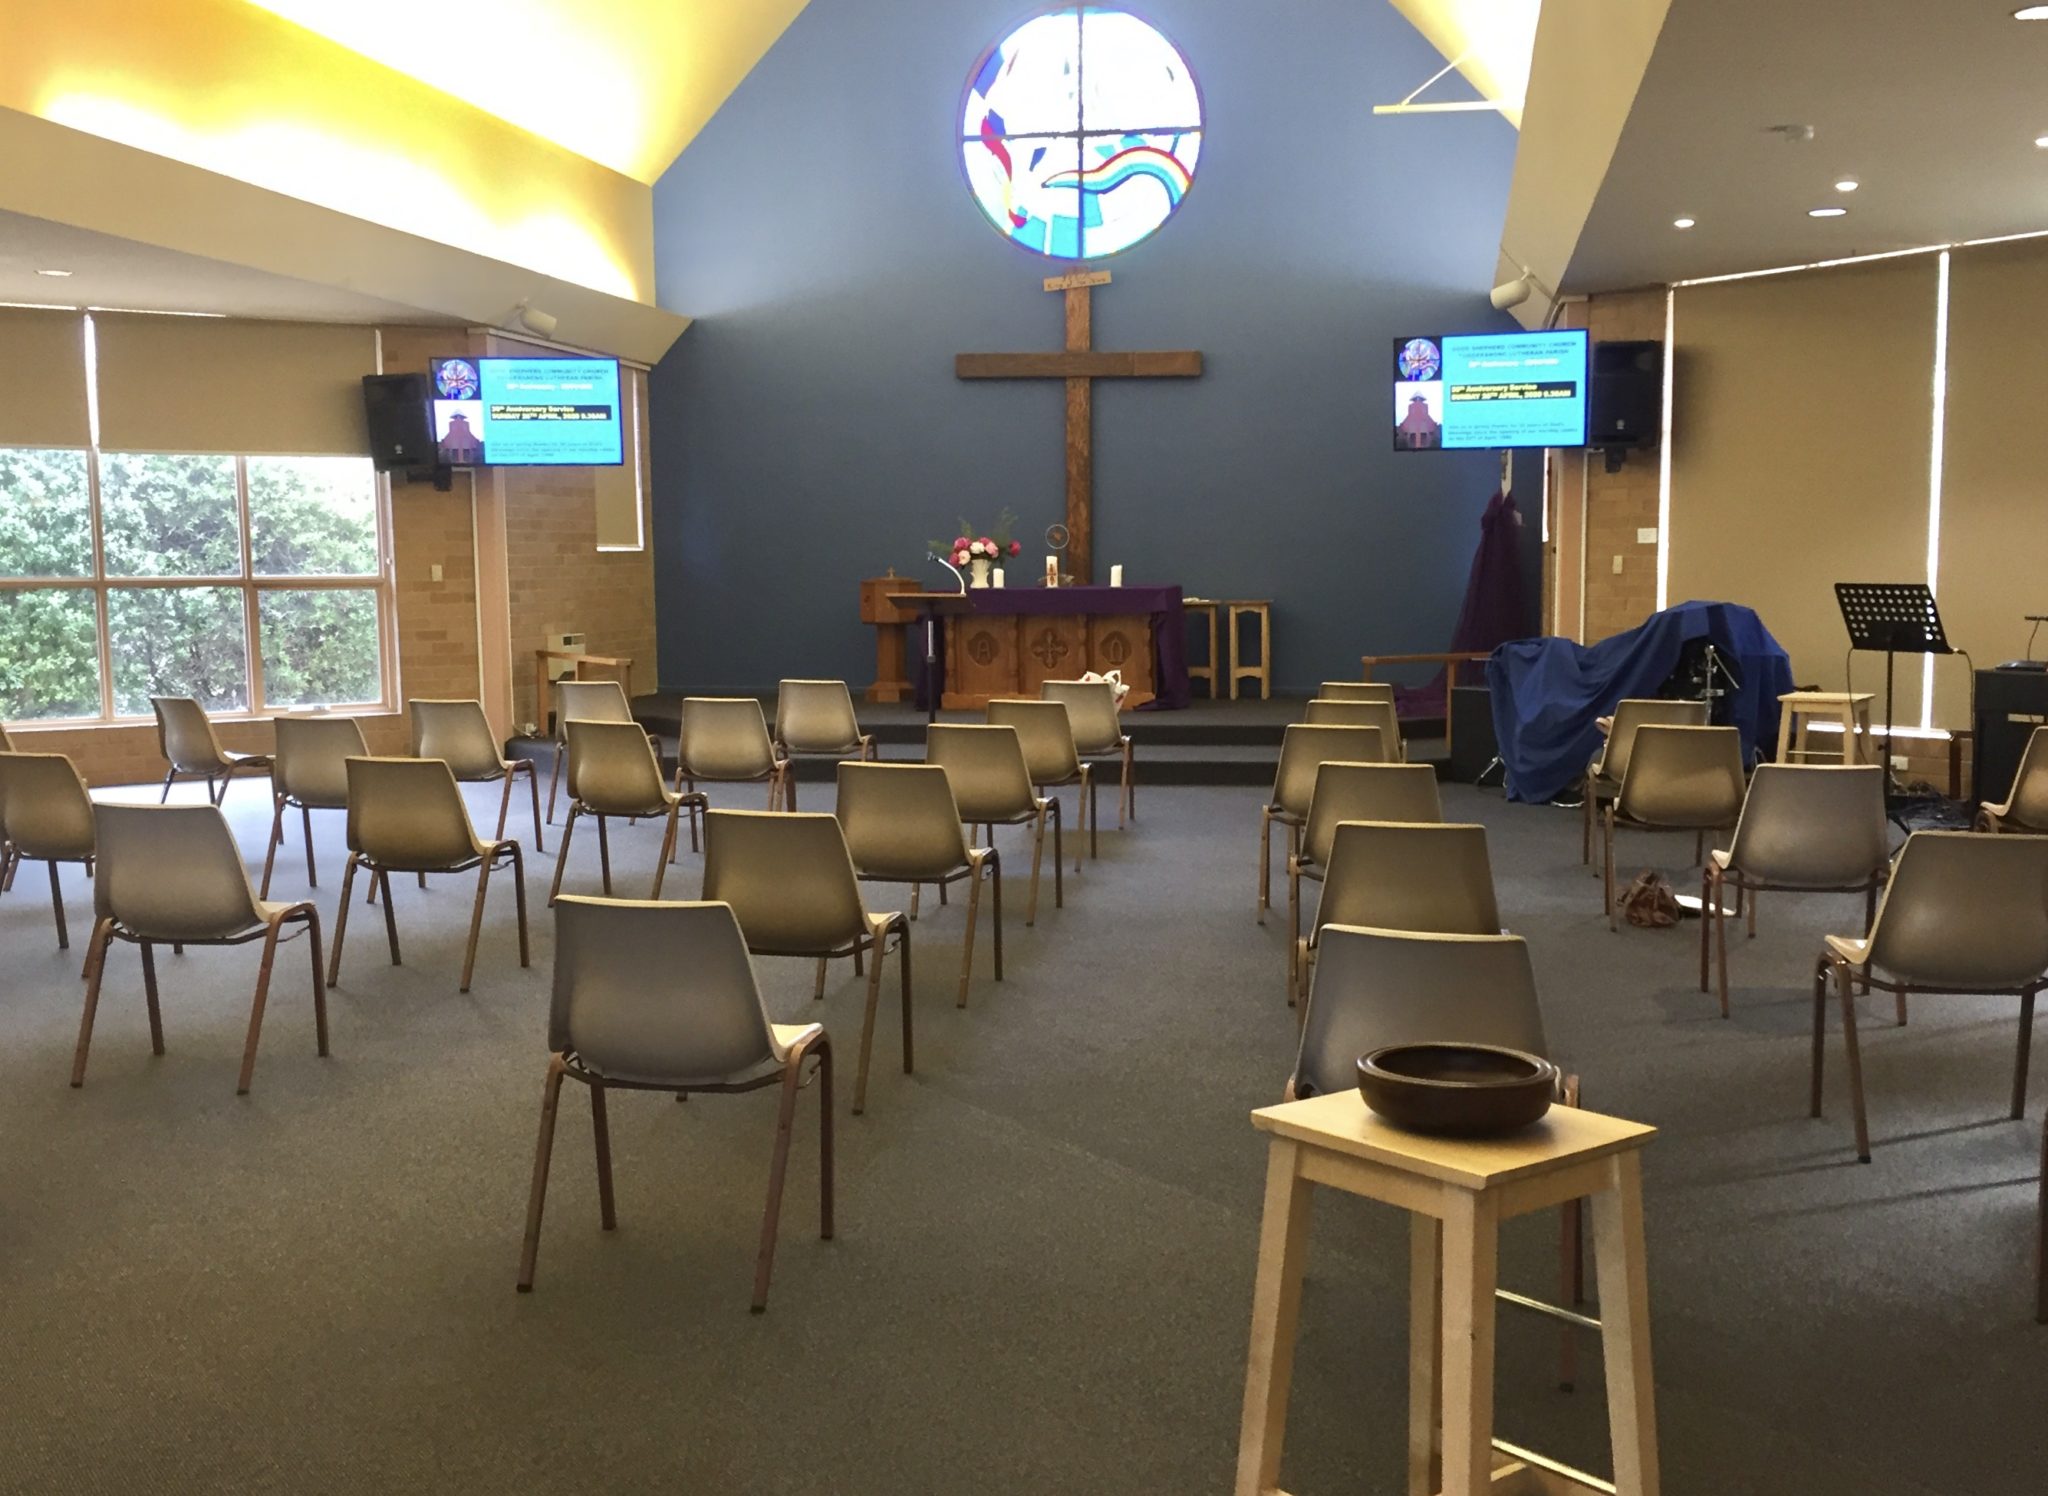 Our final, social-distanced worship space prior to the government closure of worship spaces